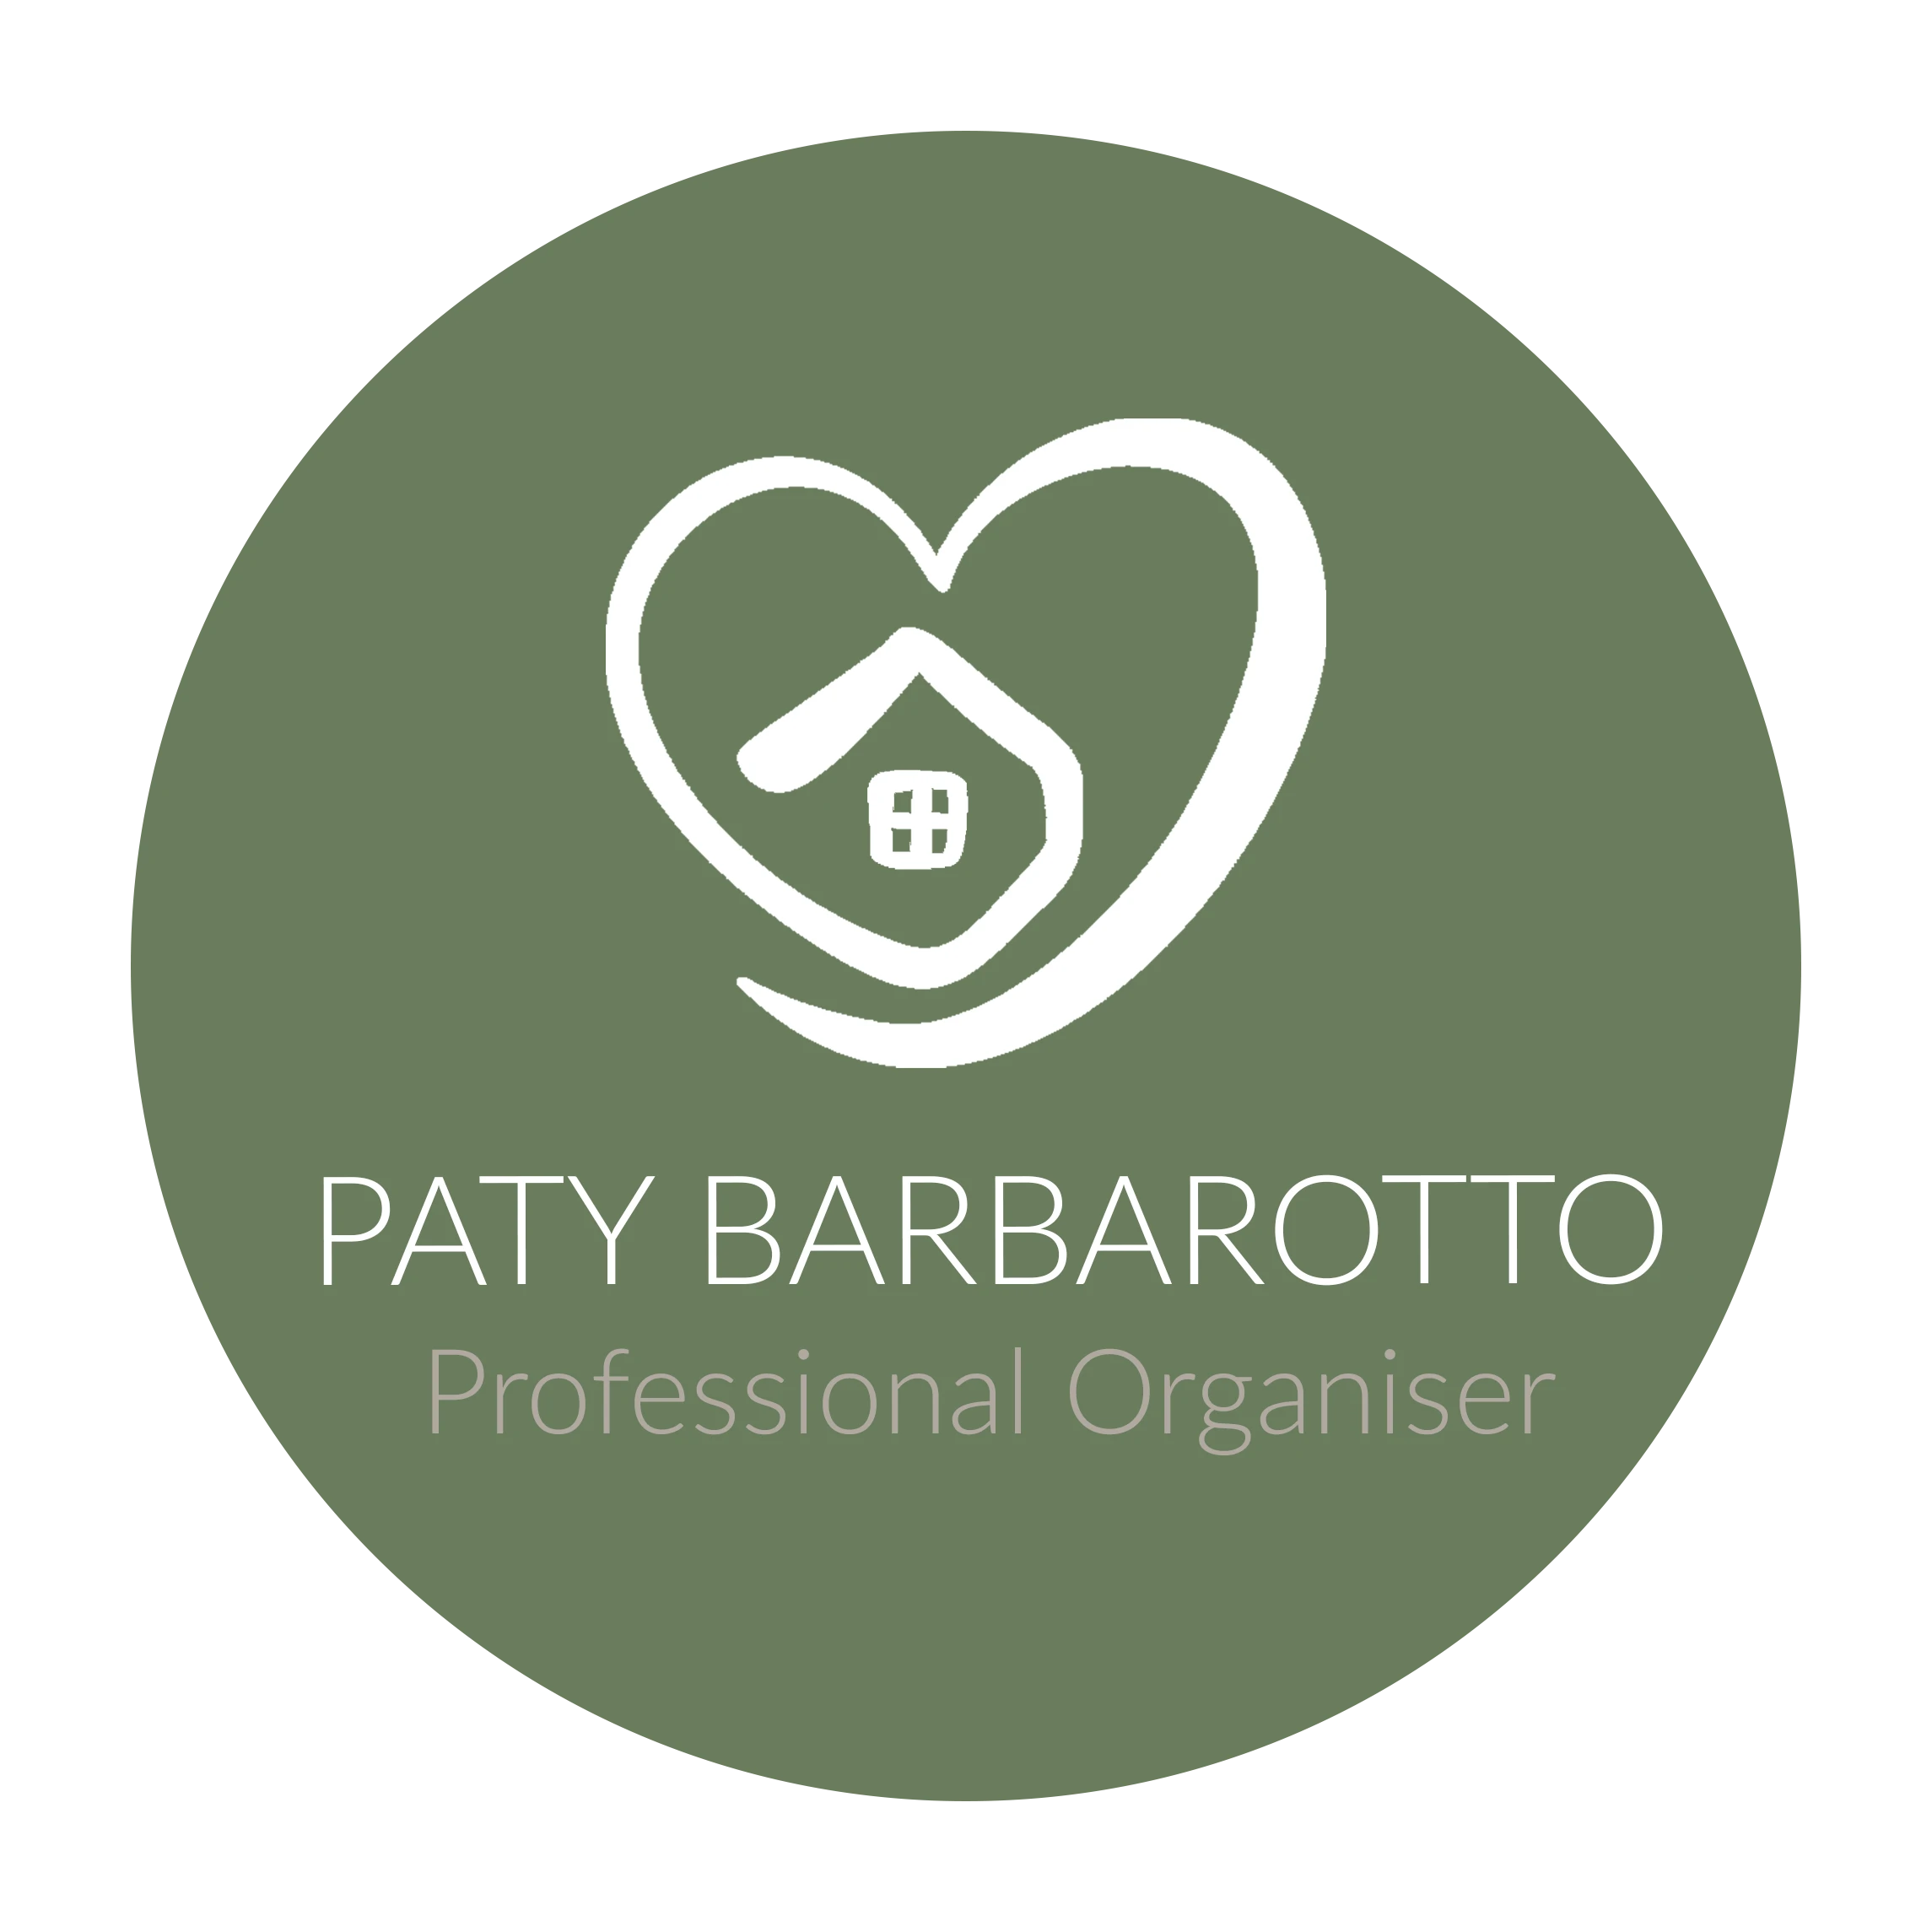 Paty Barbarotto Professional Organiser & Decllutter Services